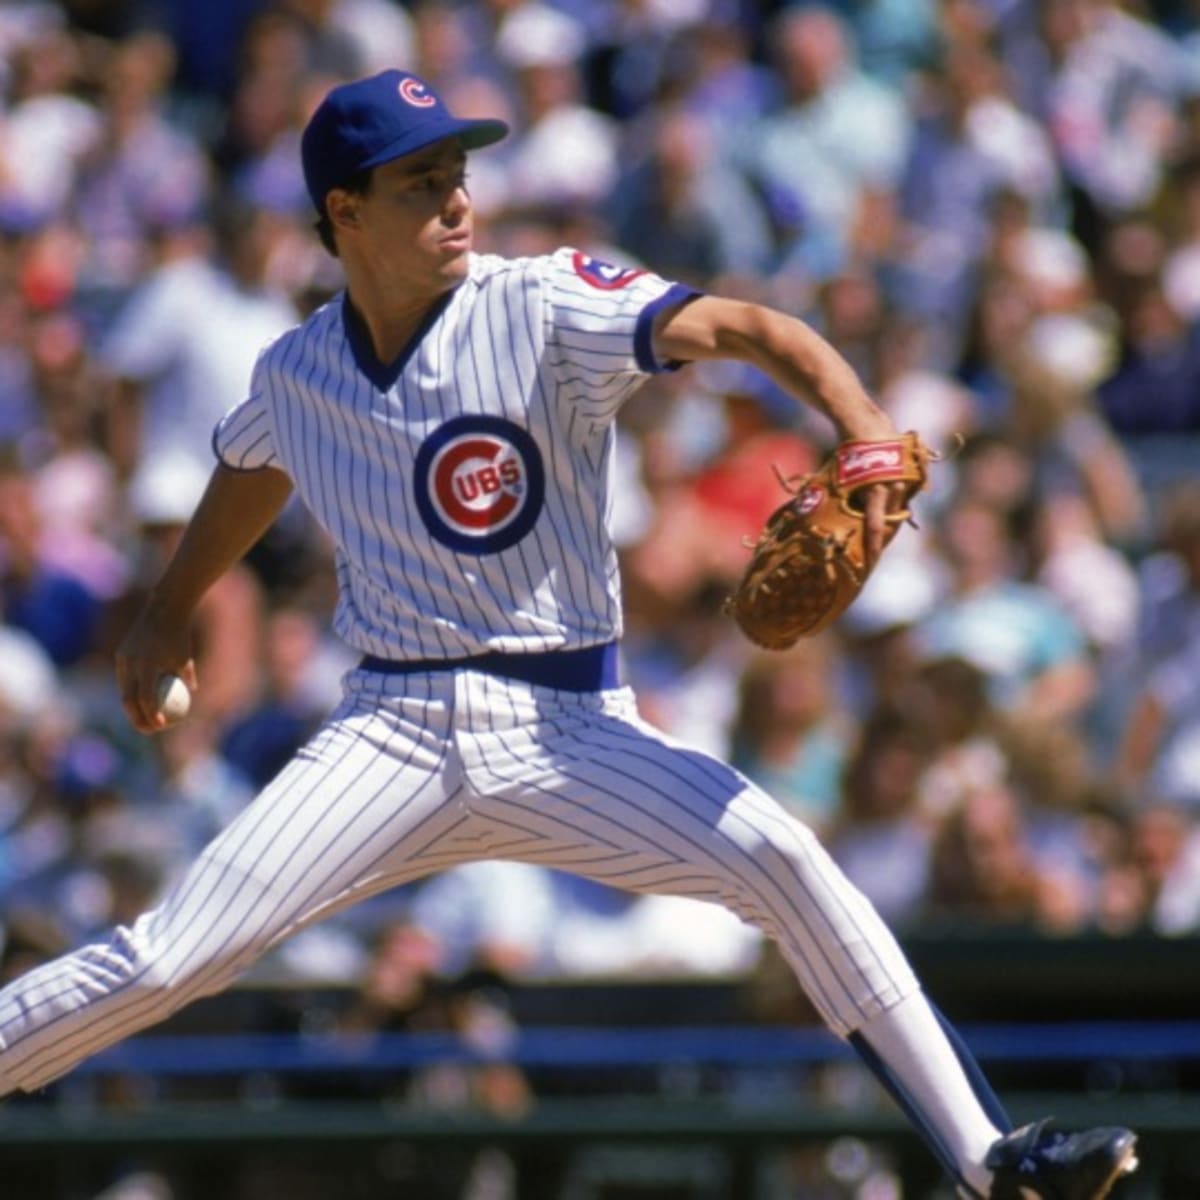 Minor league scouting report for Chicago Cubs prospect Greg Maddux